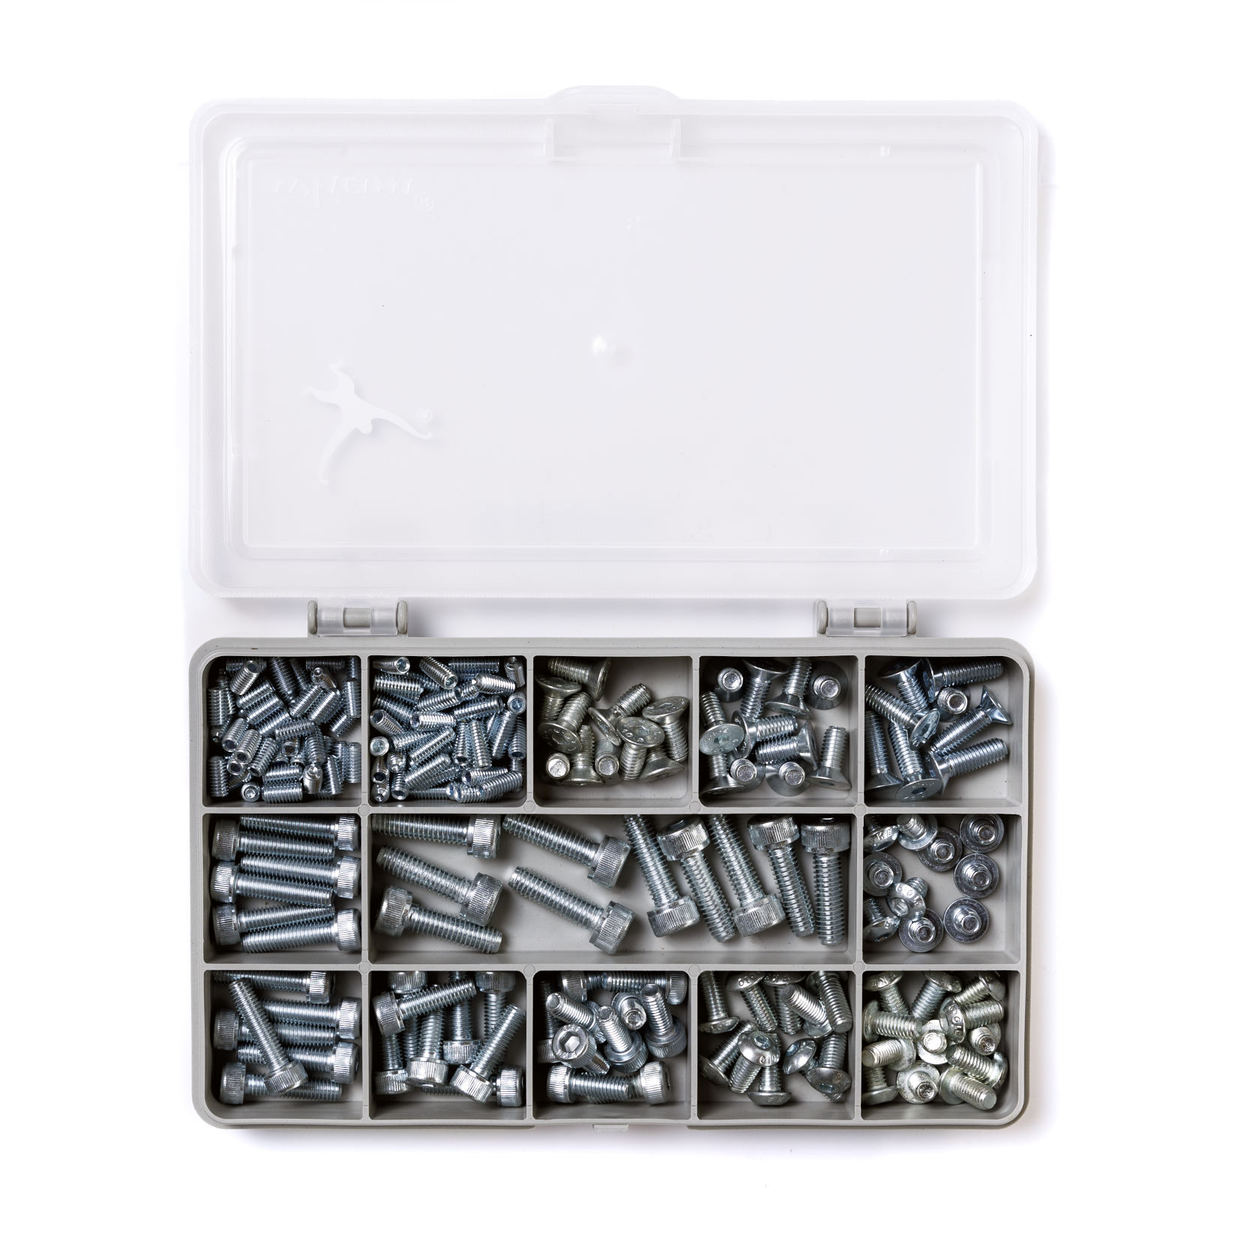 An assortment of bright zinc plated high tensile steel socket screws and washers for bicycles. Supplied in a sturdy, recycled plastic compartment box and assembled with pride in the UK.